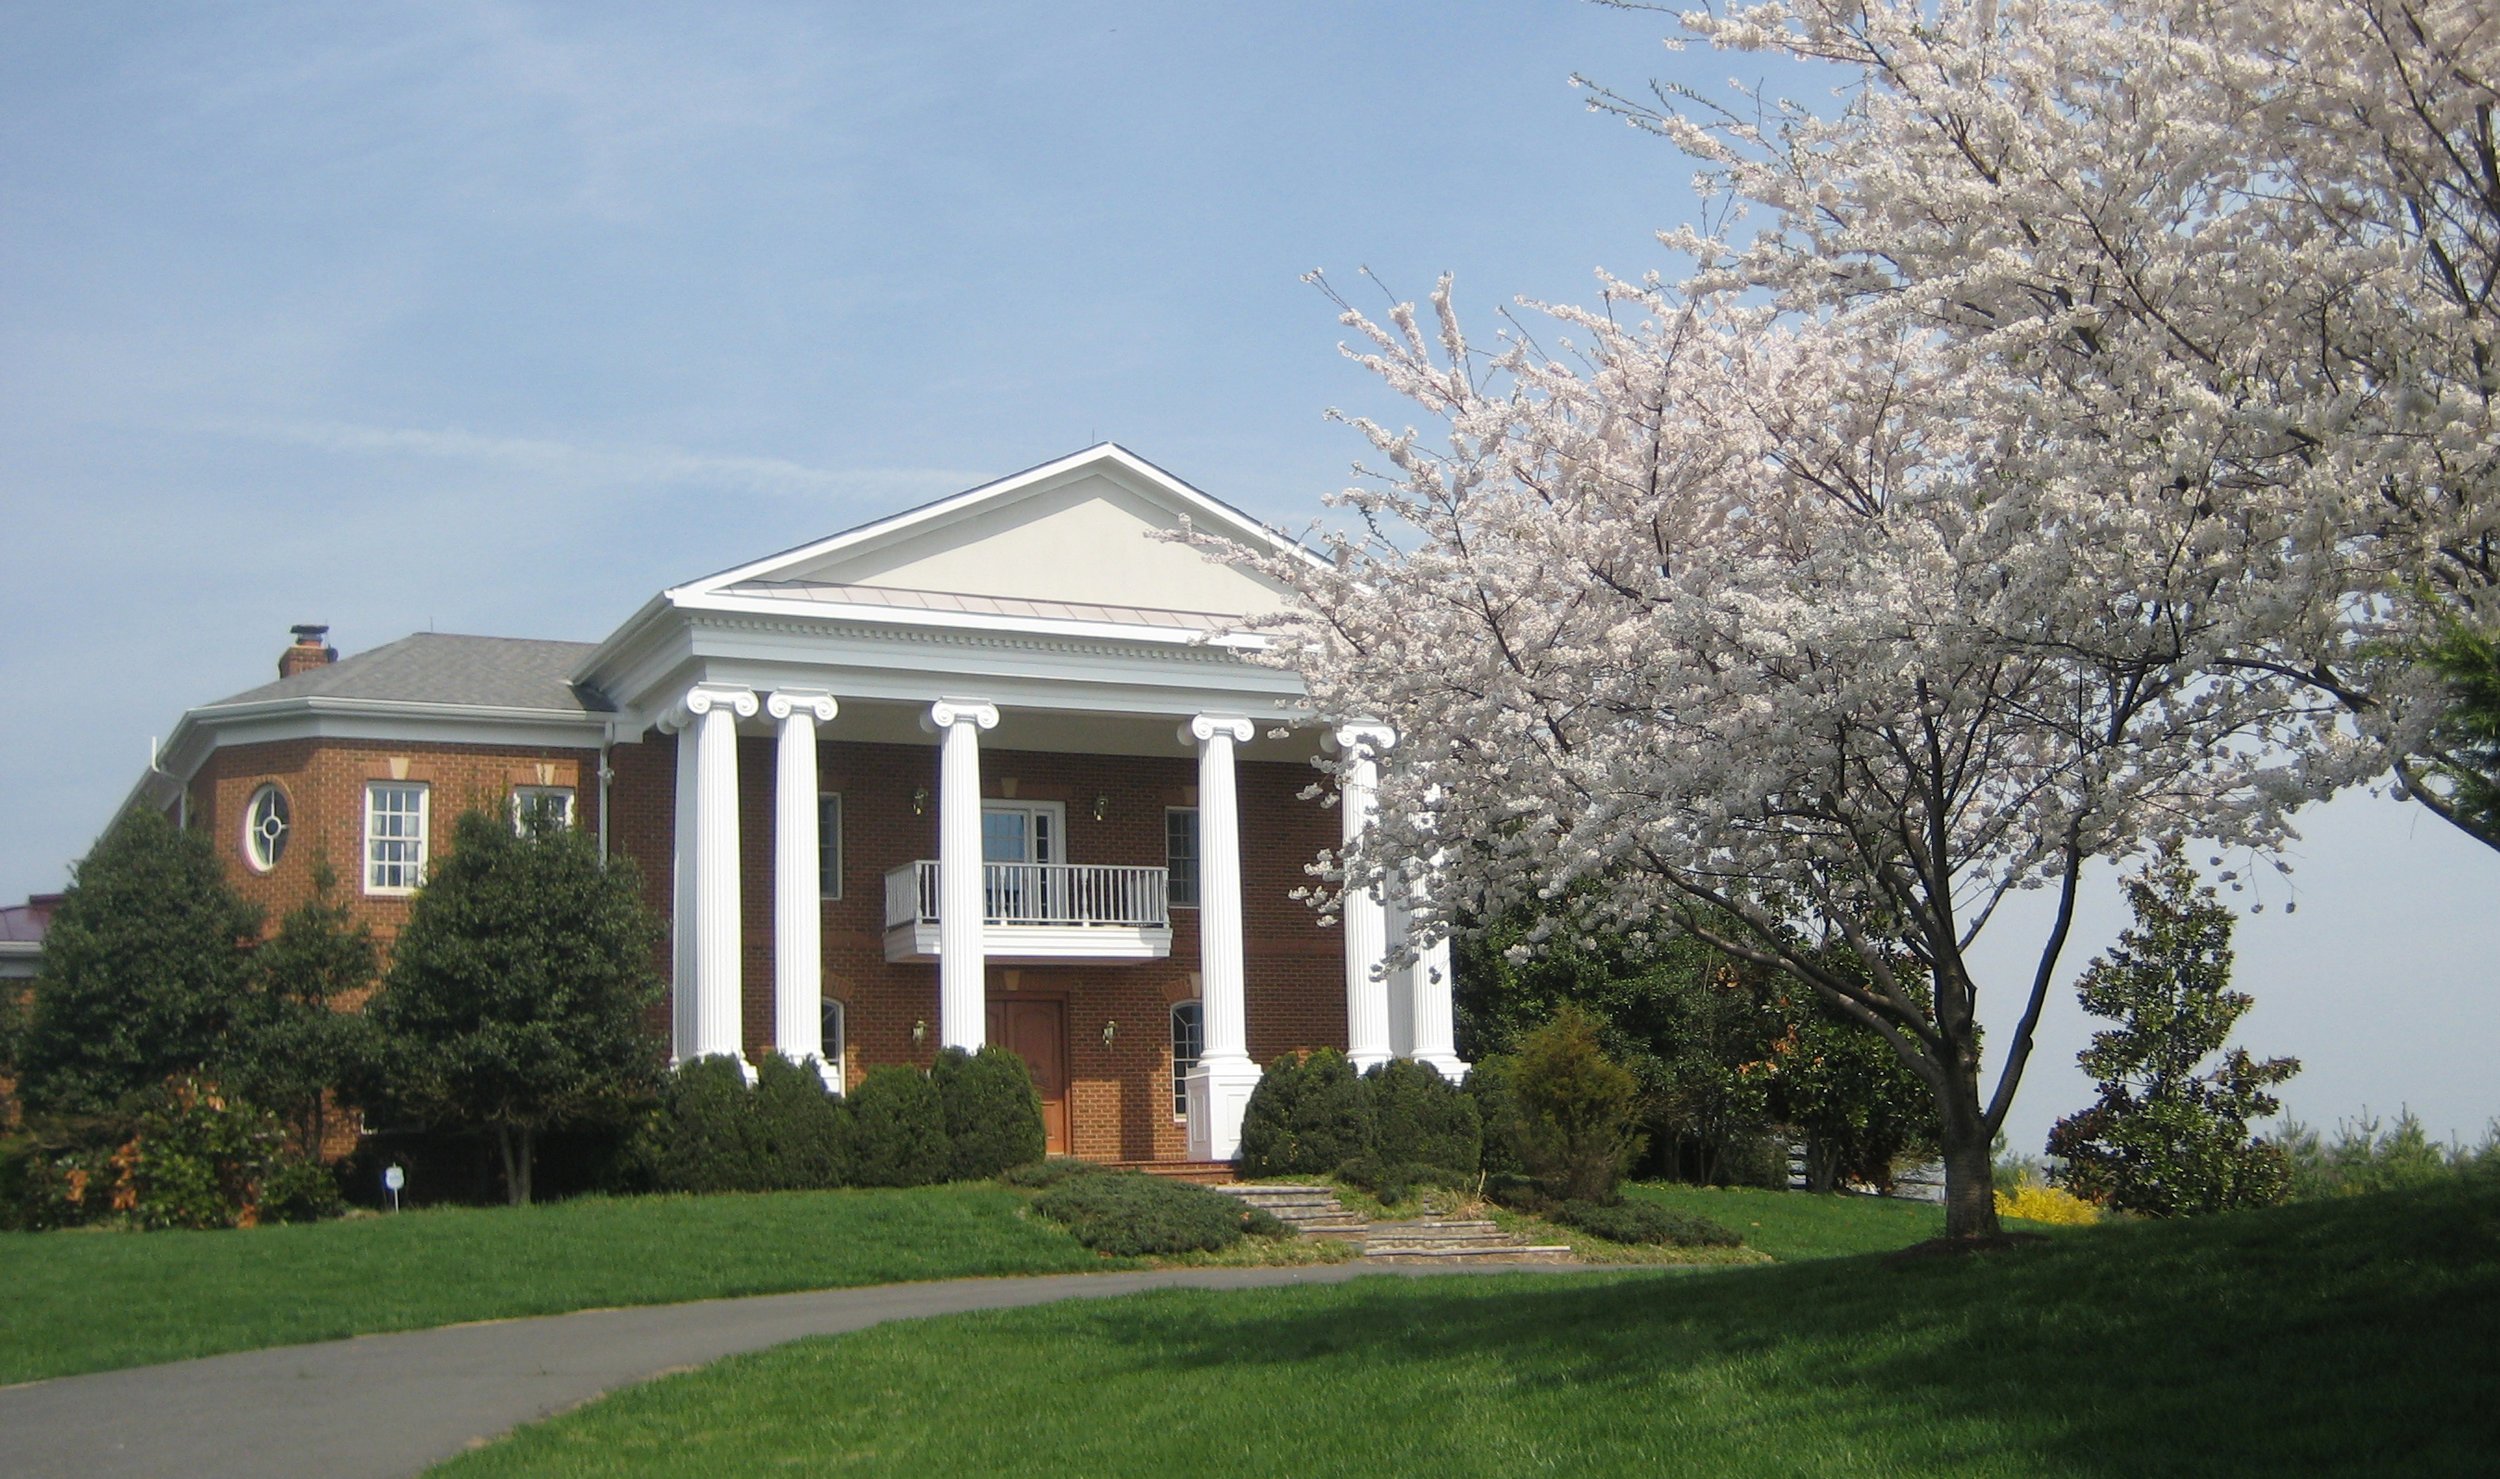 A large building with columns and a tree in the background.